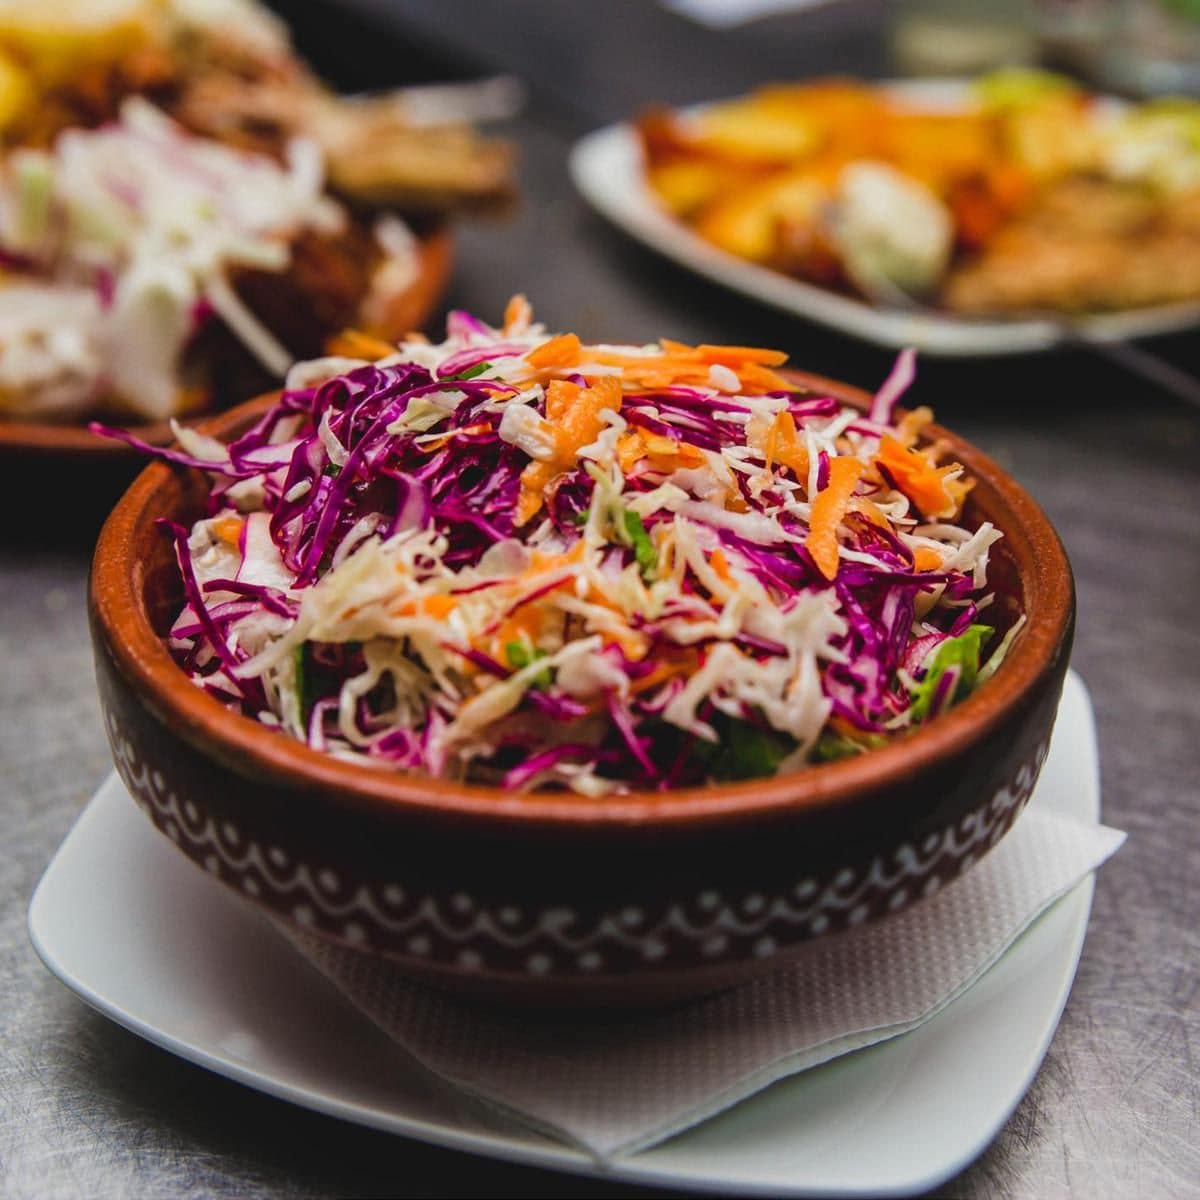 Healthy salad with red cabbage